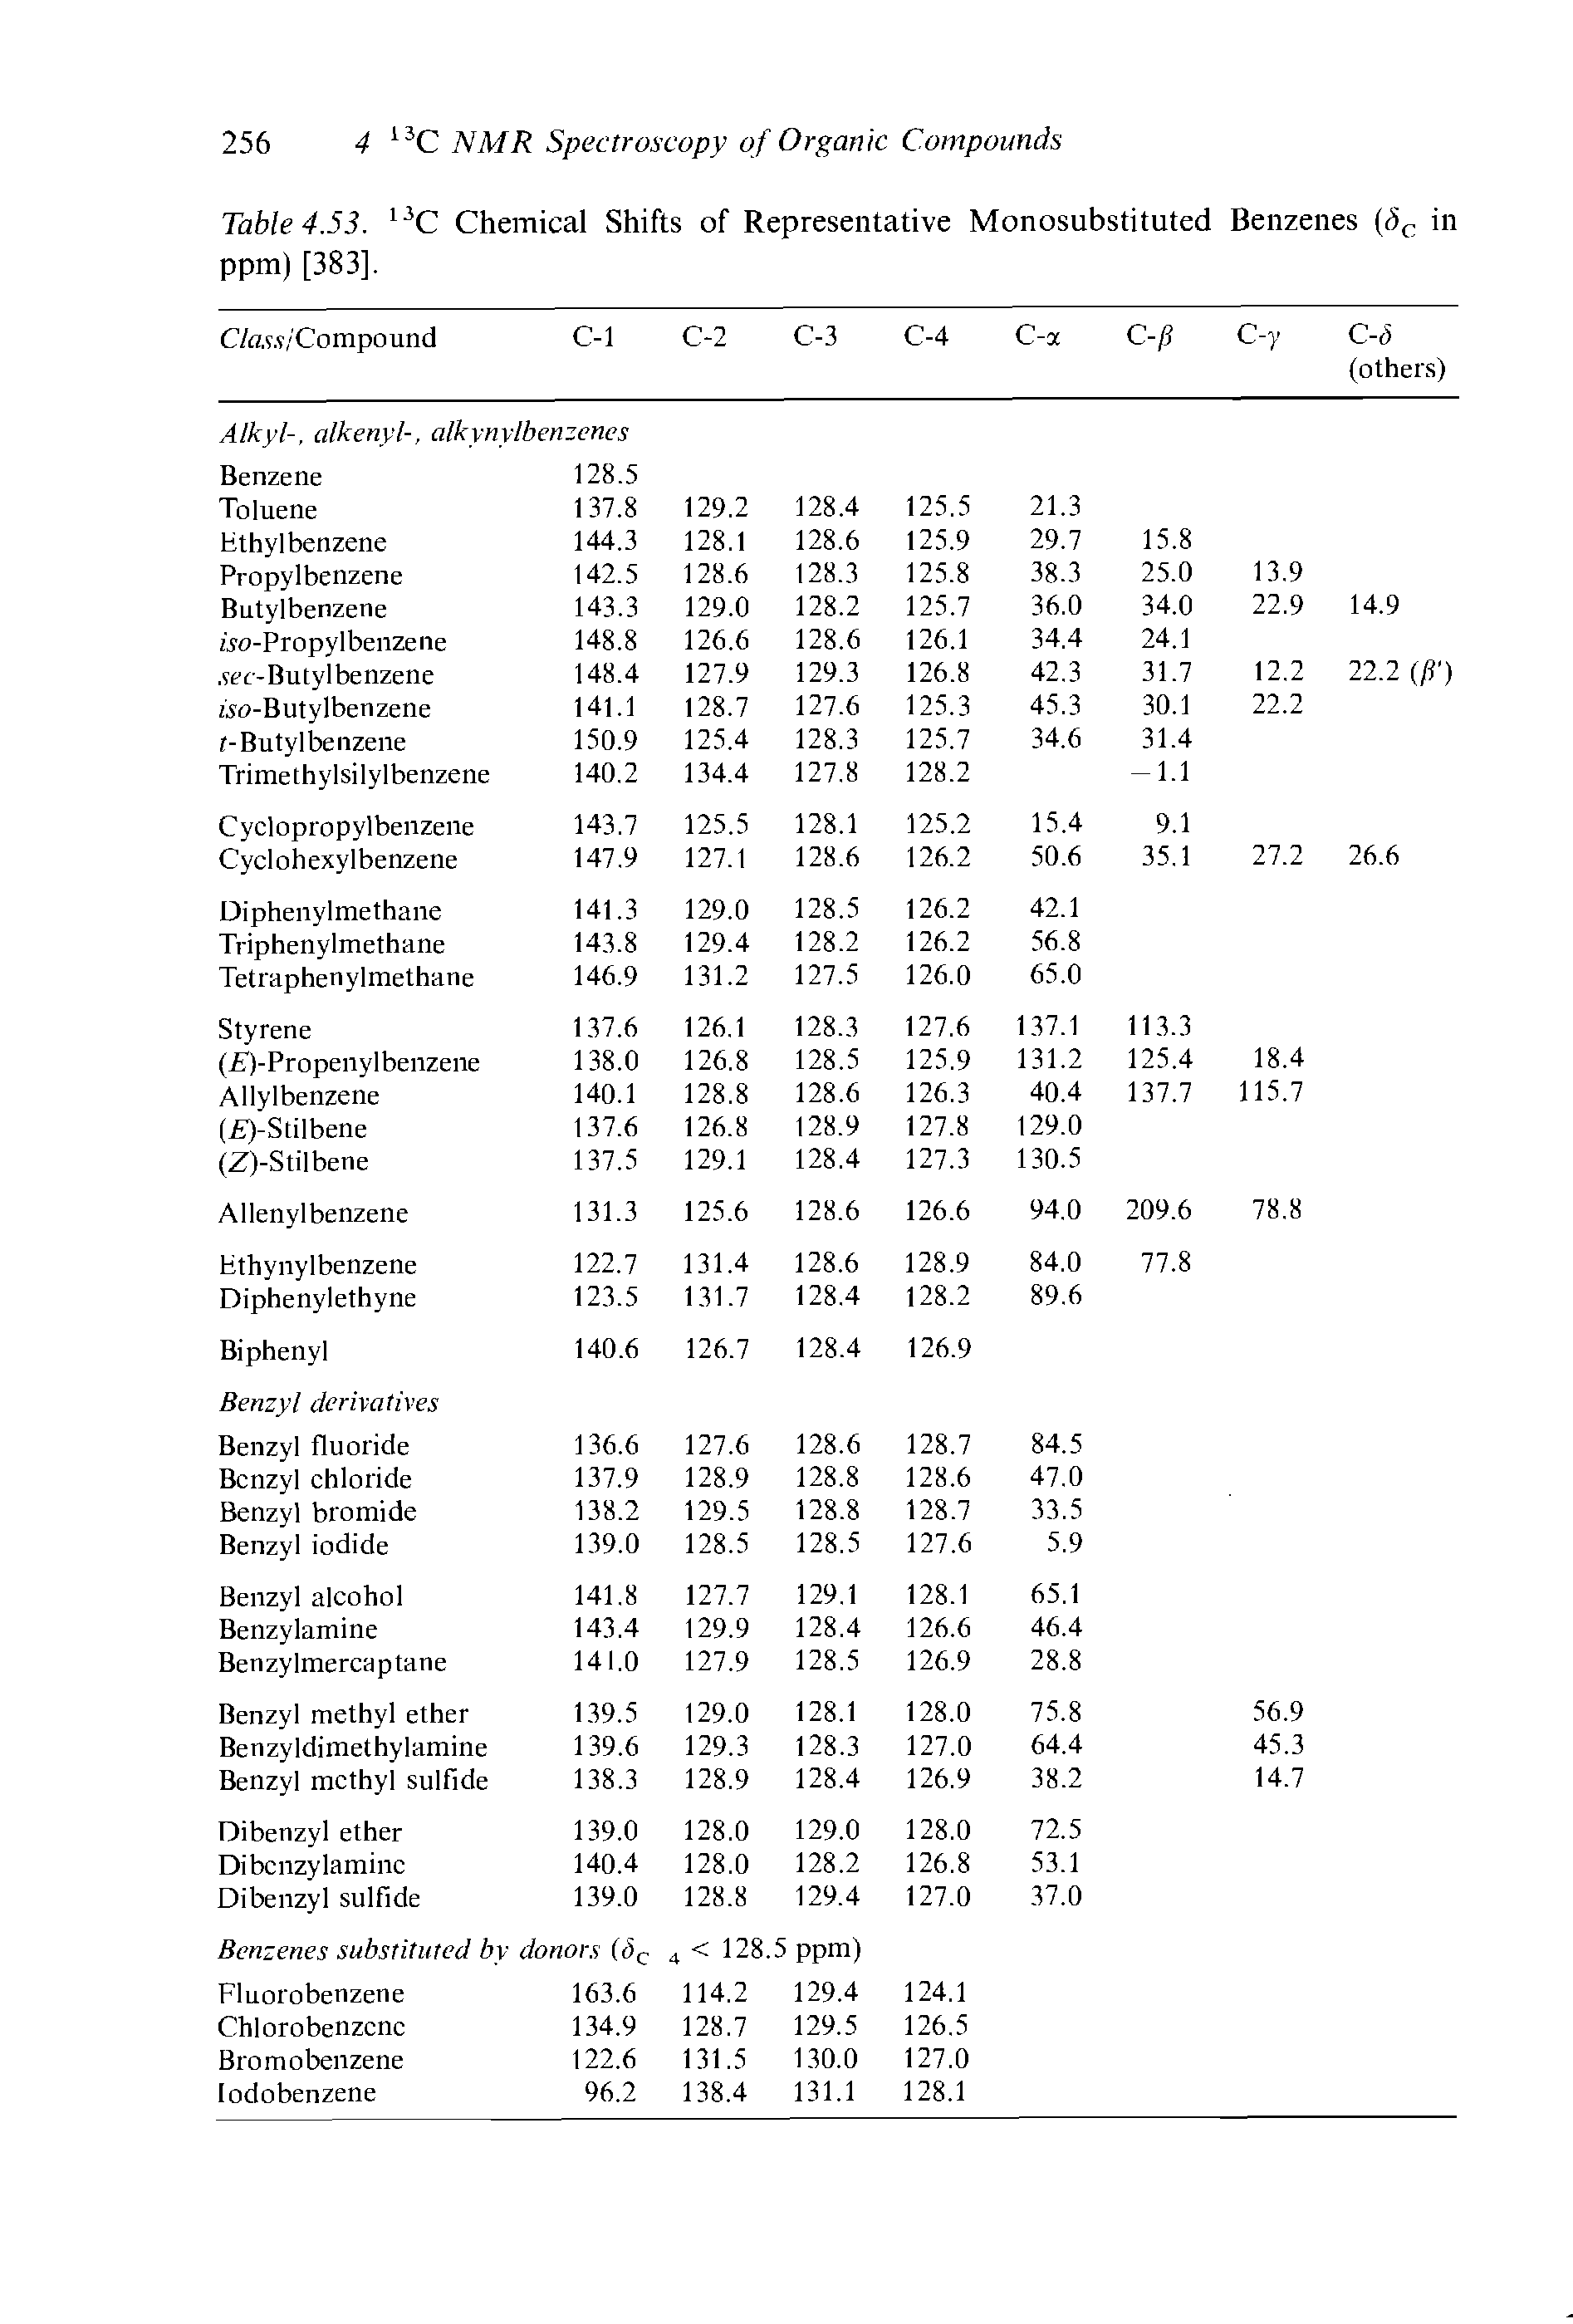 Table 4.53. 13C Chemical Shifts of Representative Monosubstituted Benzenes (<5C in ppm) [383].